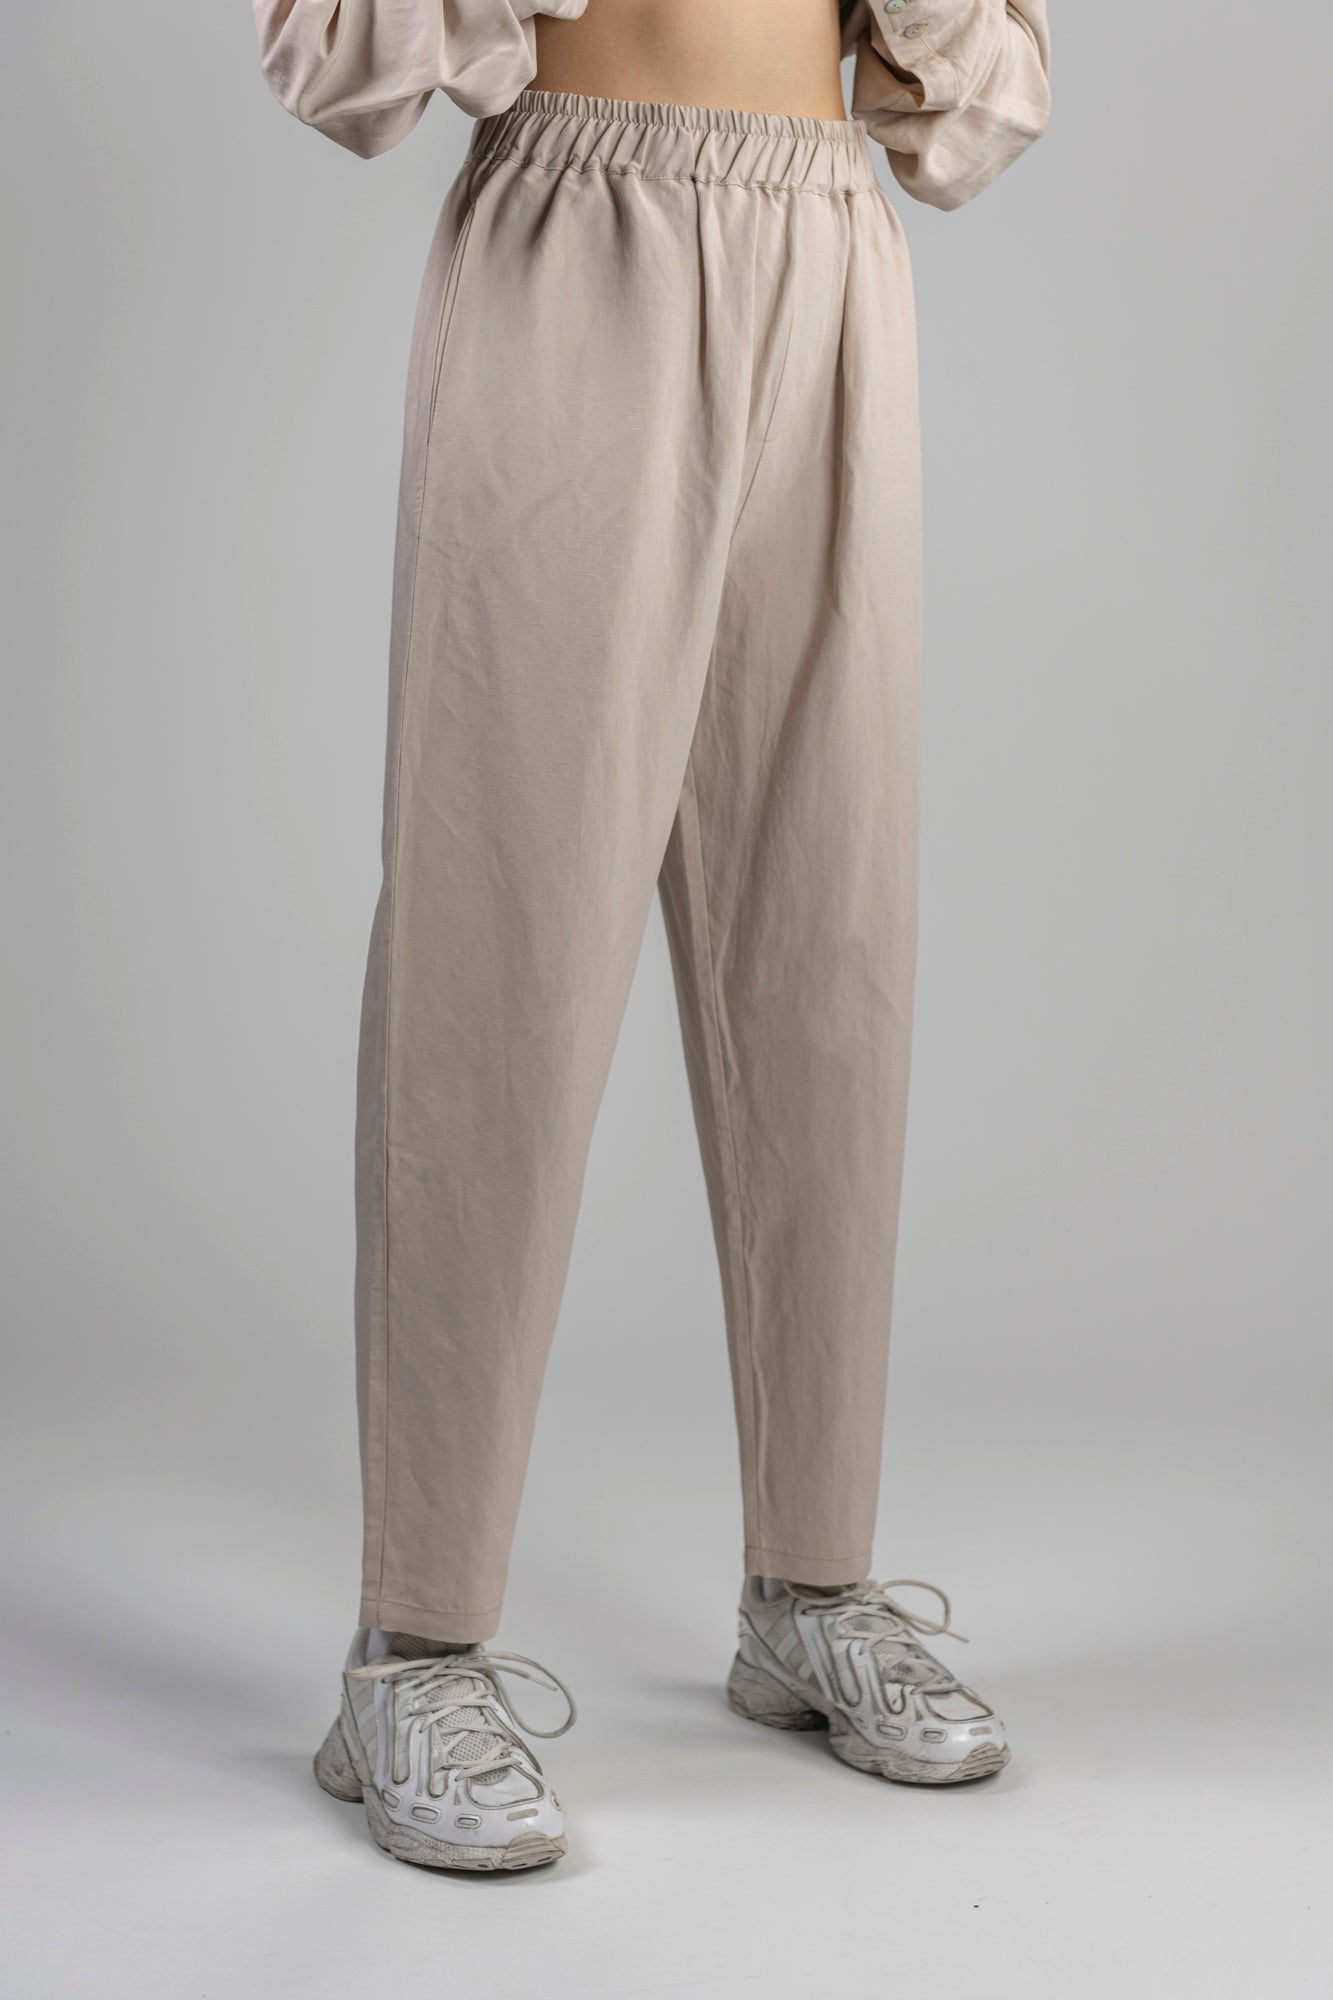 Talbots 100% Linen Oatmeal Beige Lined Lagenlook Pants, size 18 Tan - $51  (65% Off Retail) - From Irina